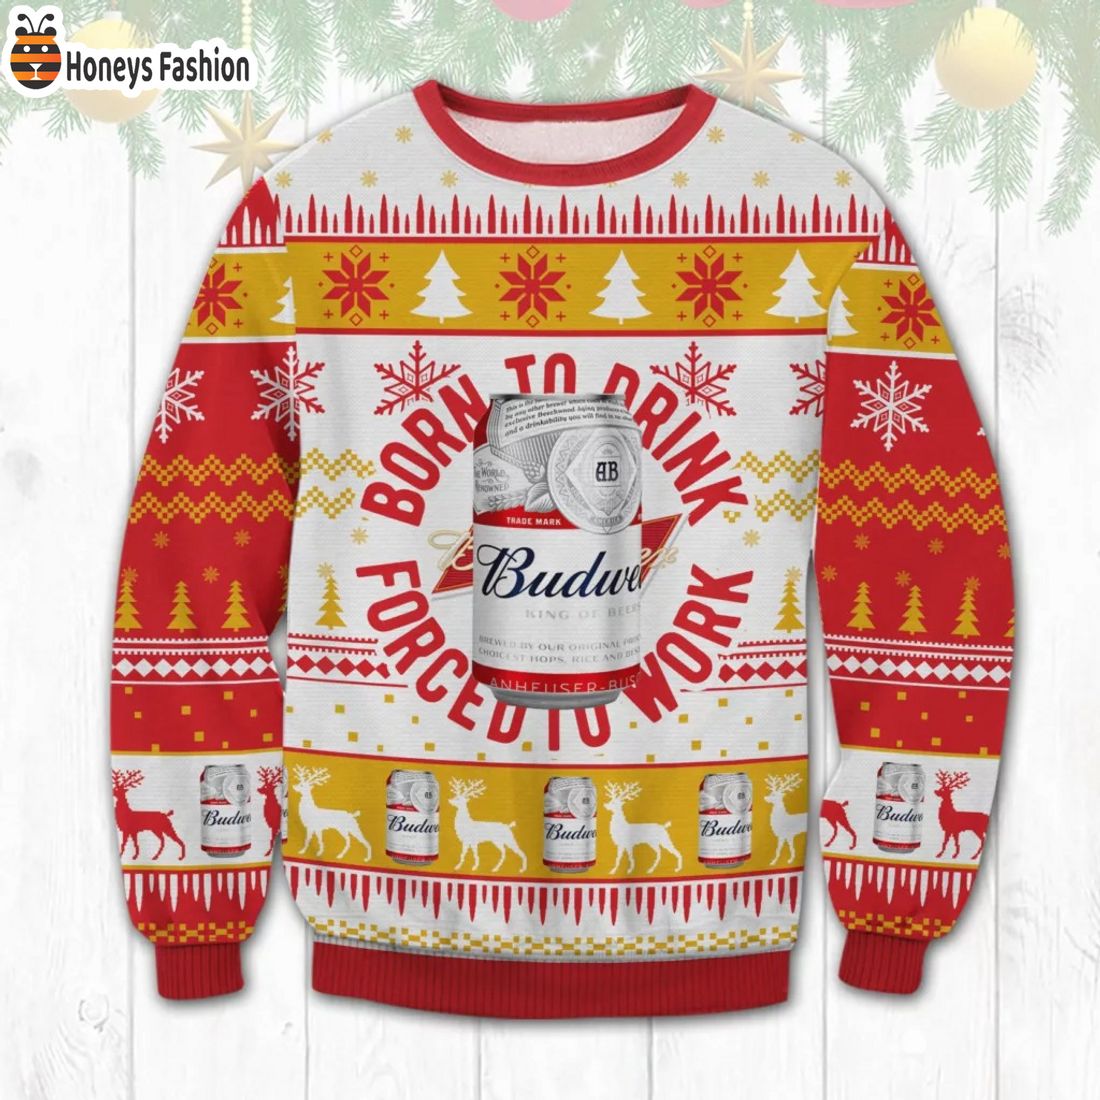 Budweiser Born To Drink Force To Work Ugly Christmas Sweater